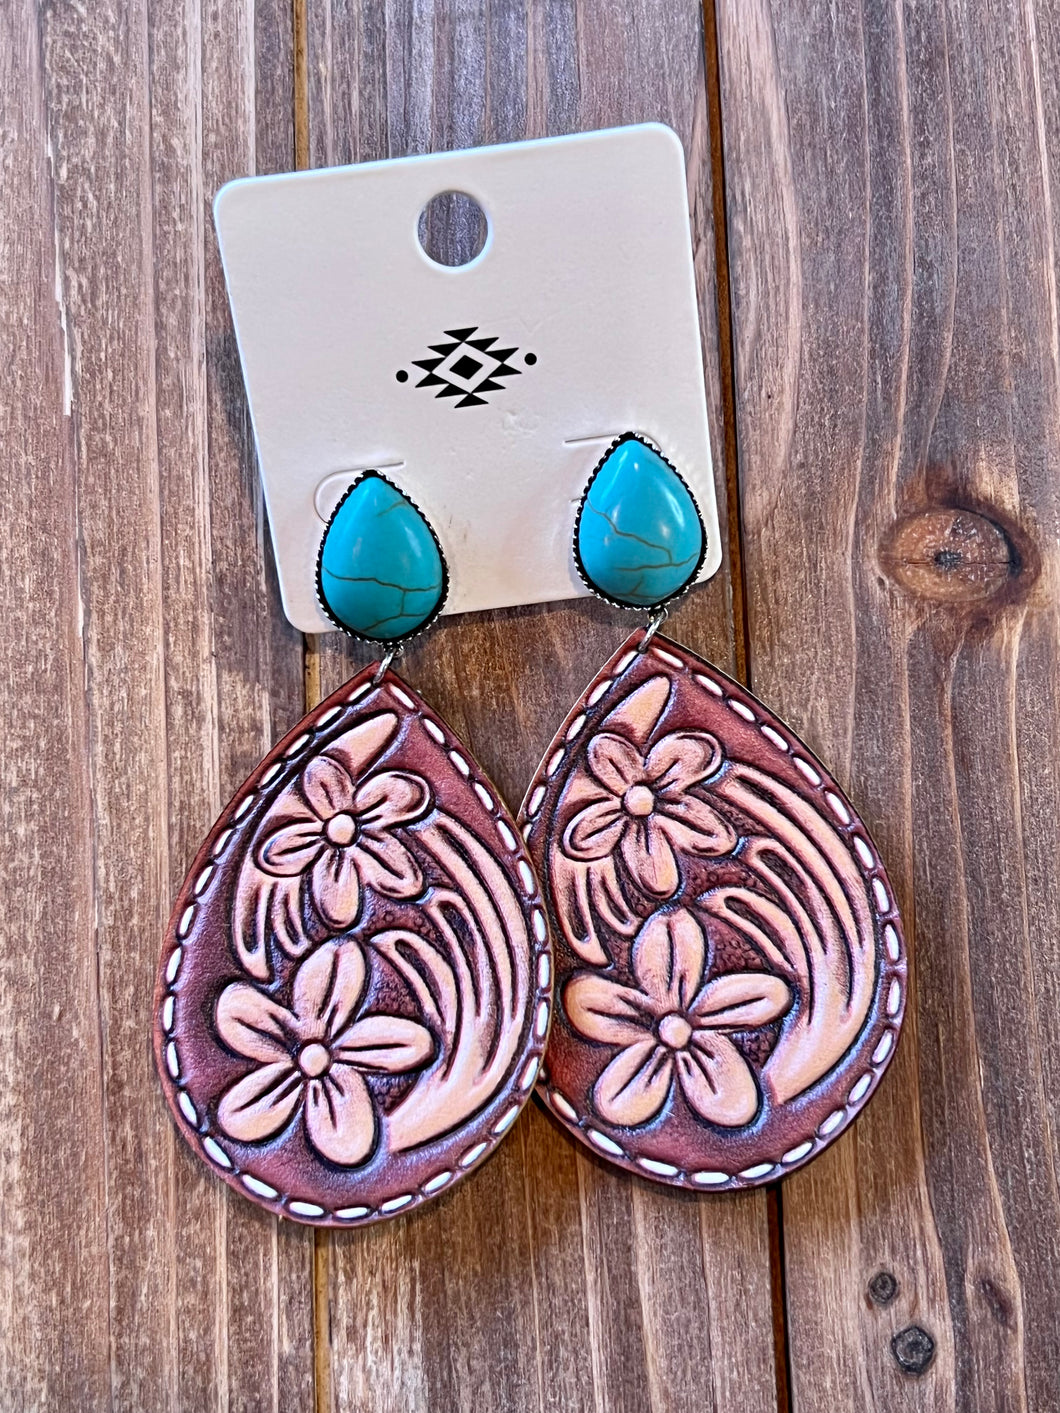 Turquoise and leather tooled double flower earrings